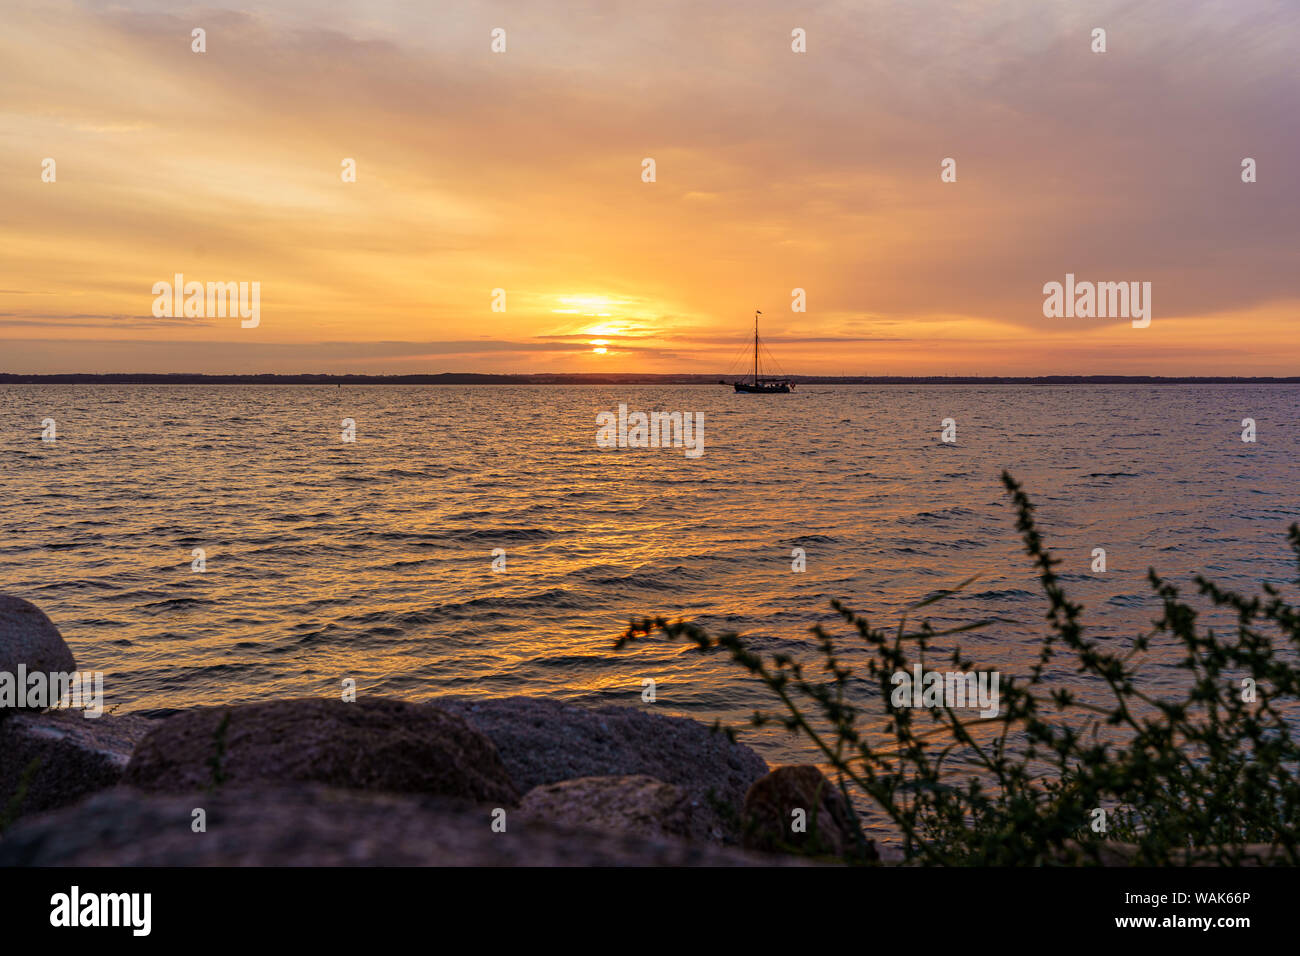 Sunset at the Baltic Sea with ship and some grasses in the foreground Stock Photo